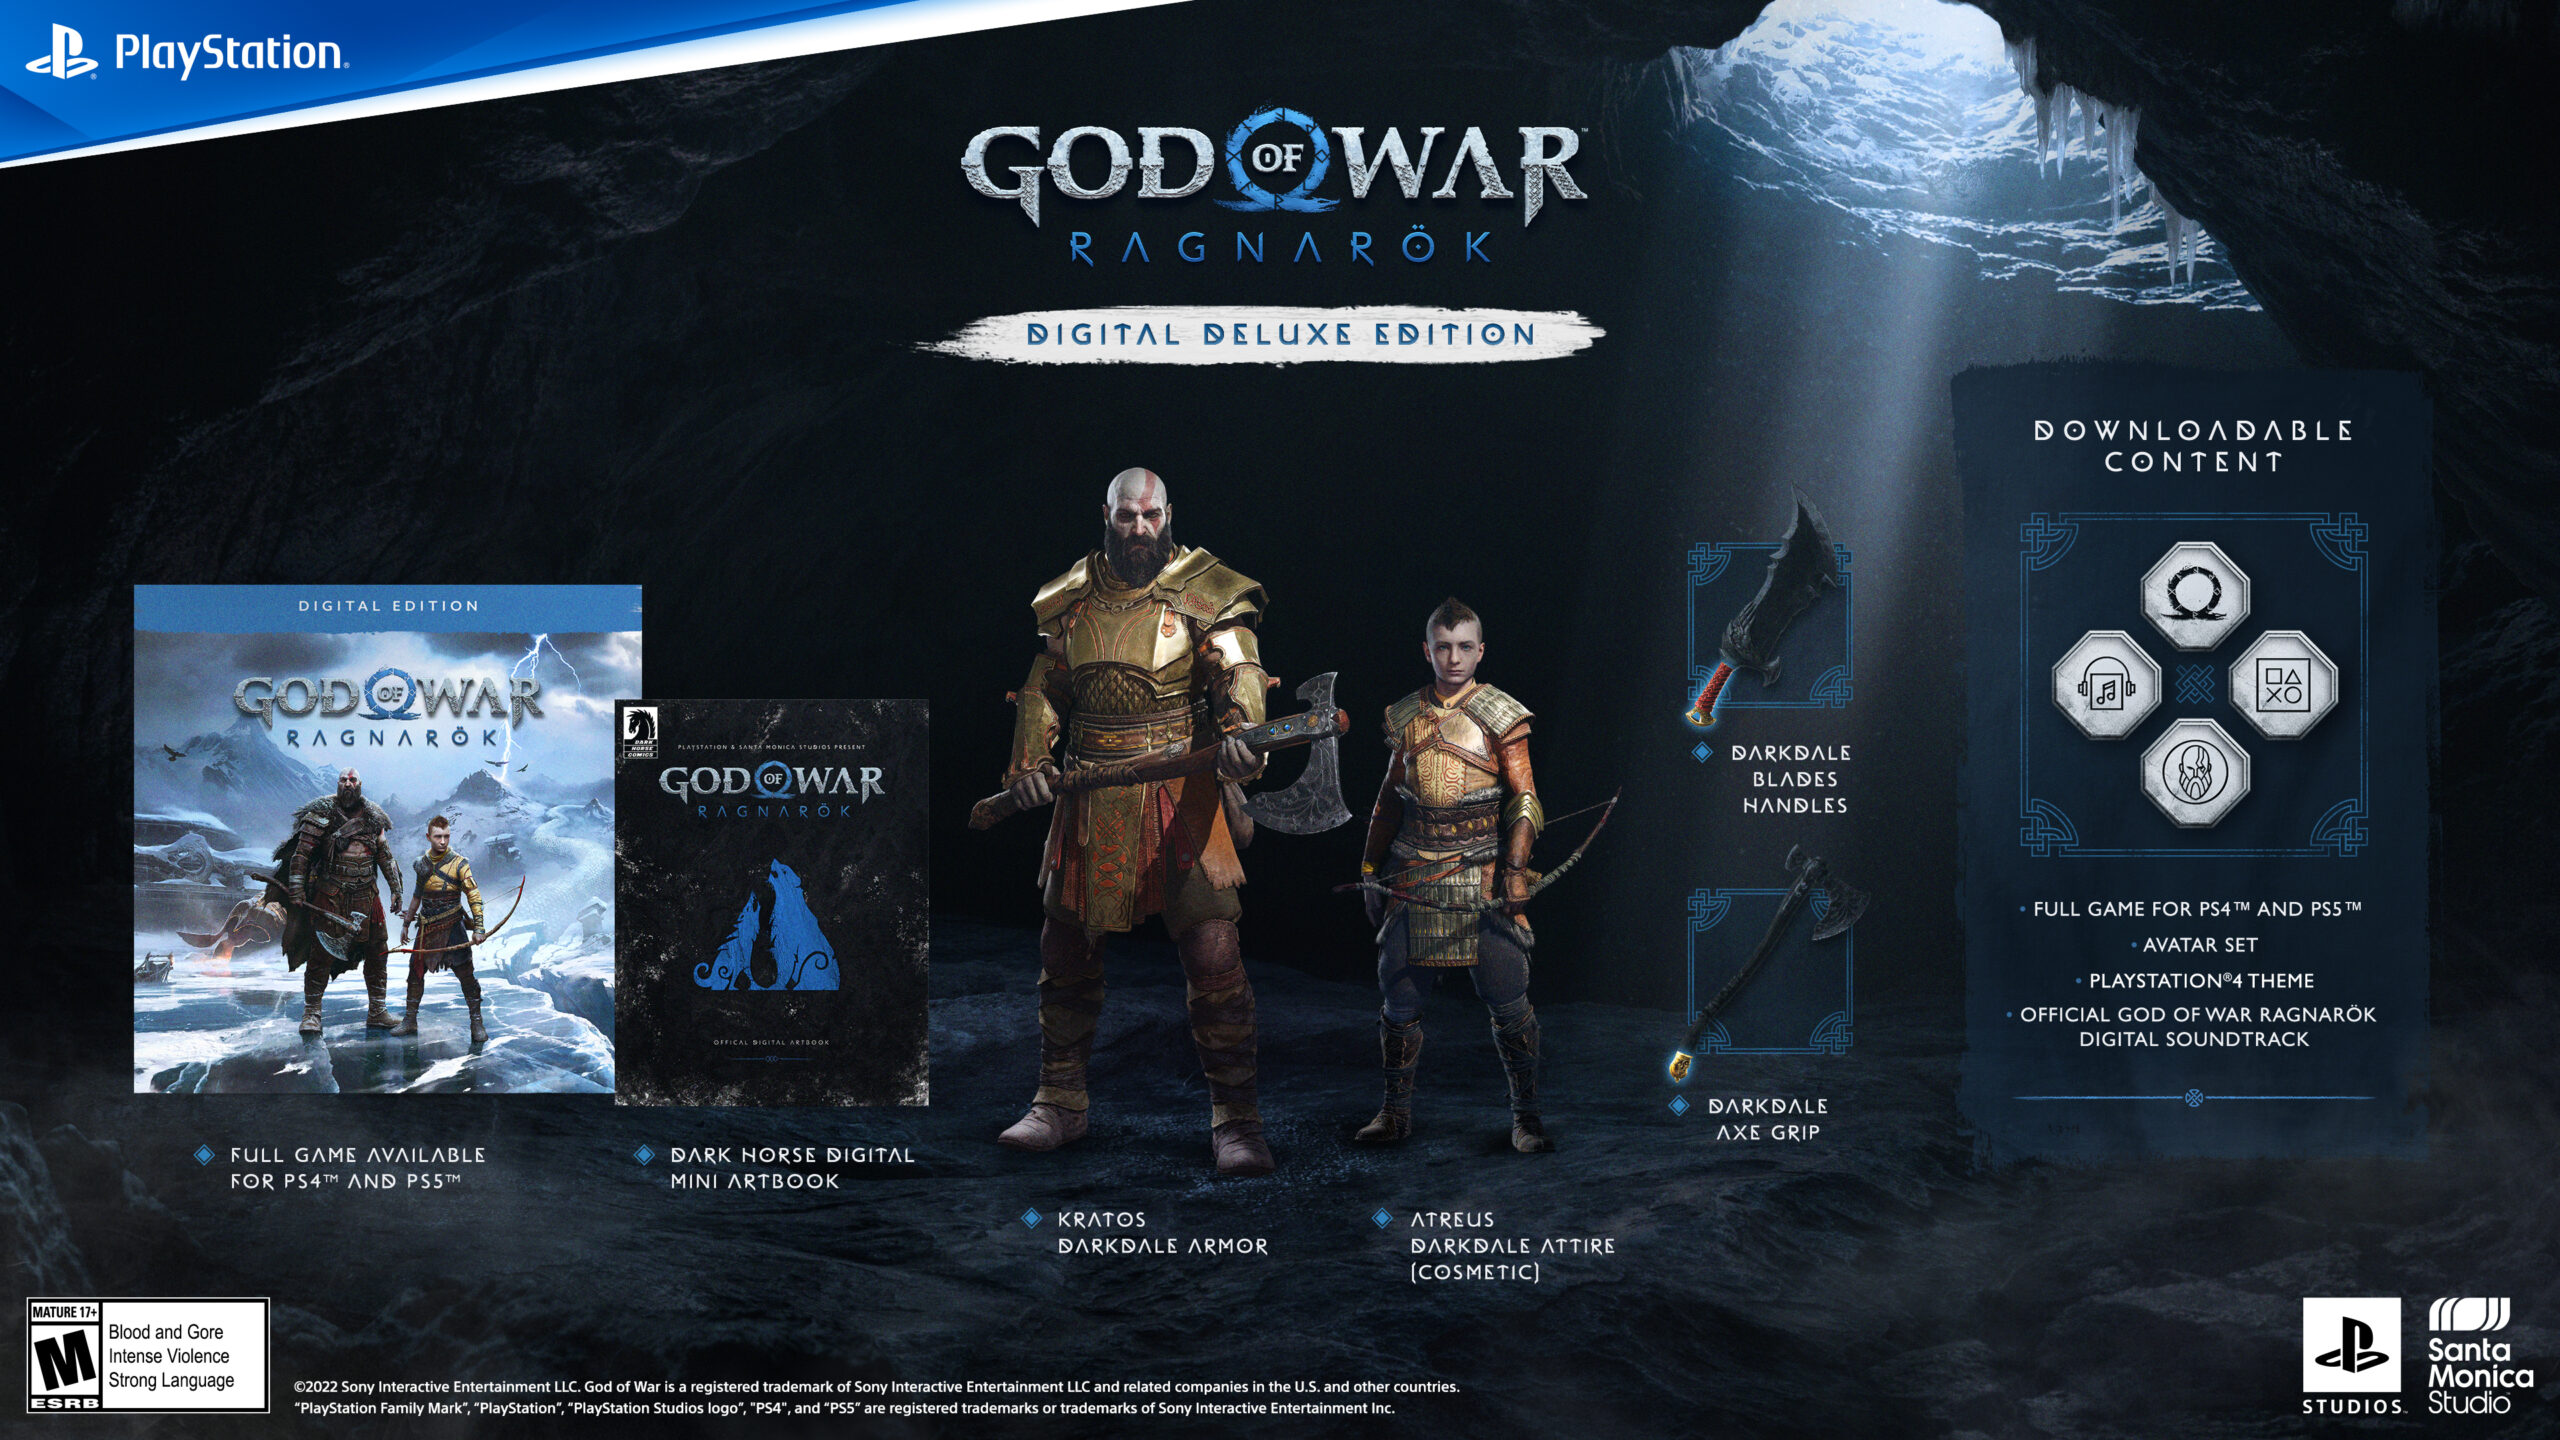 God of War Ragnarök Collectors Edition unboxing preorders available  today  PlayStationBlog